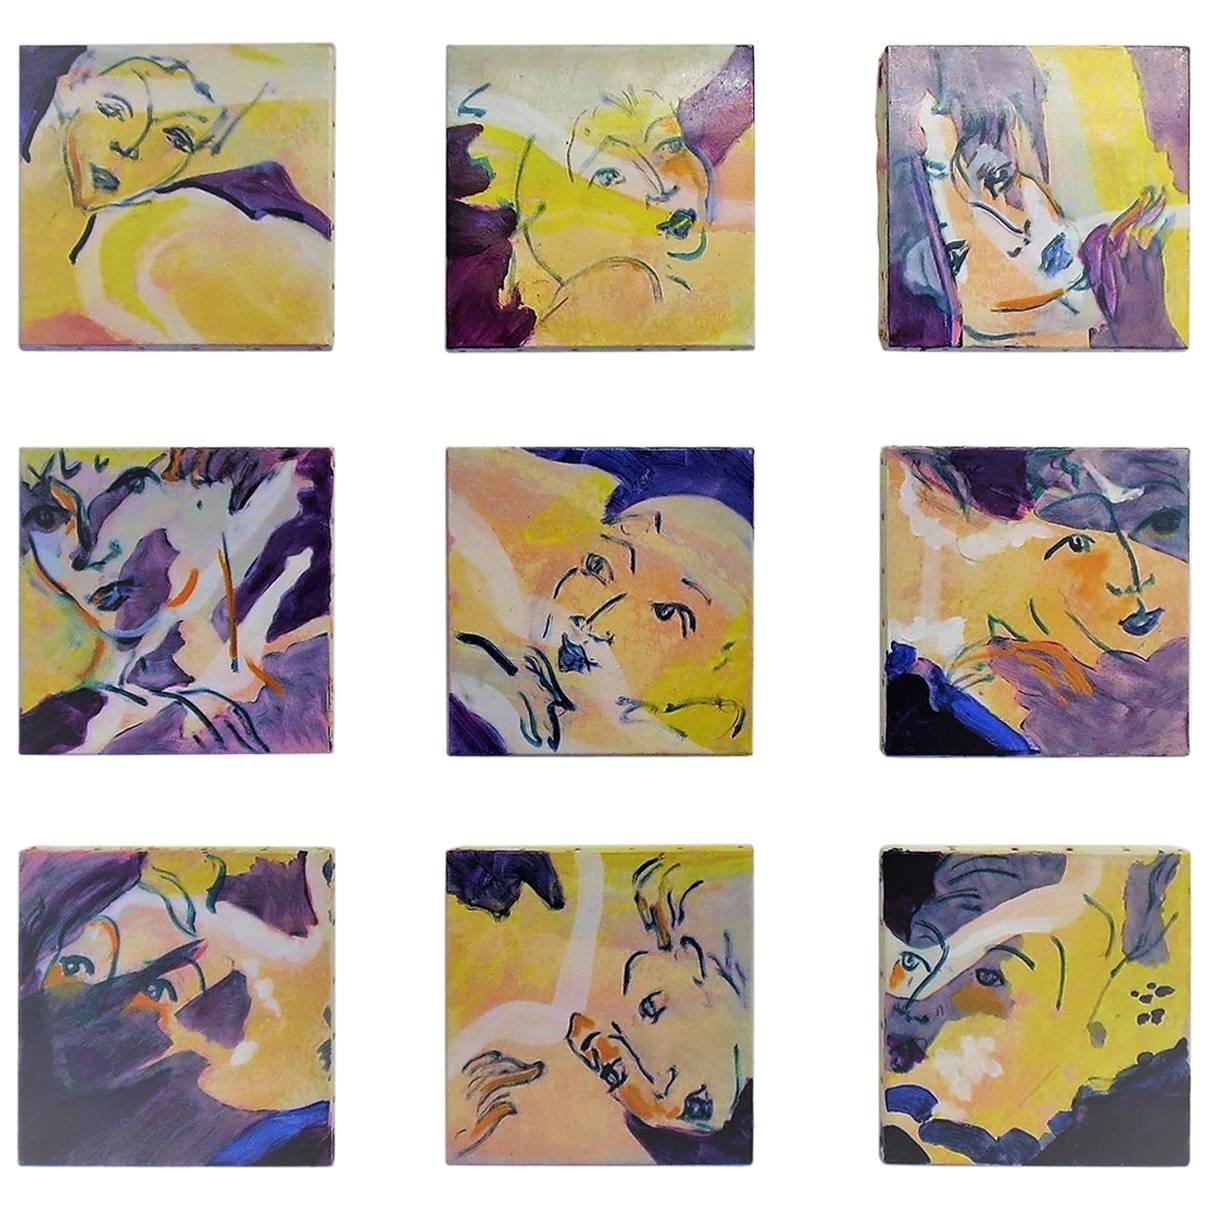 Nine Oil Paintings on Canvas on the Theme of "The Dancers" by E. Ballestra